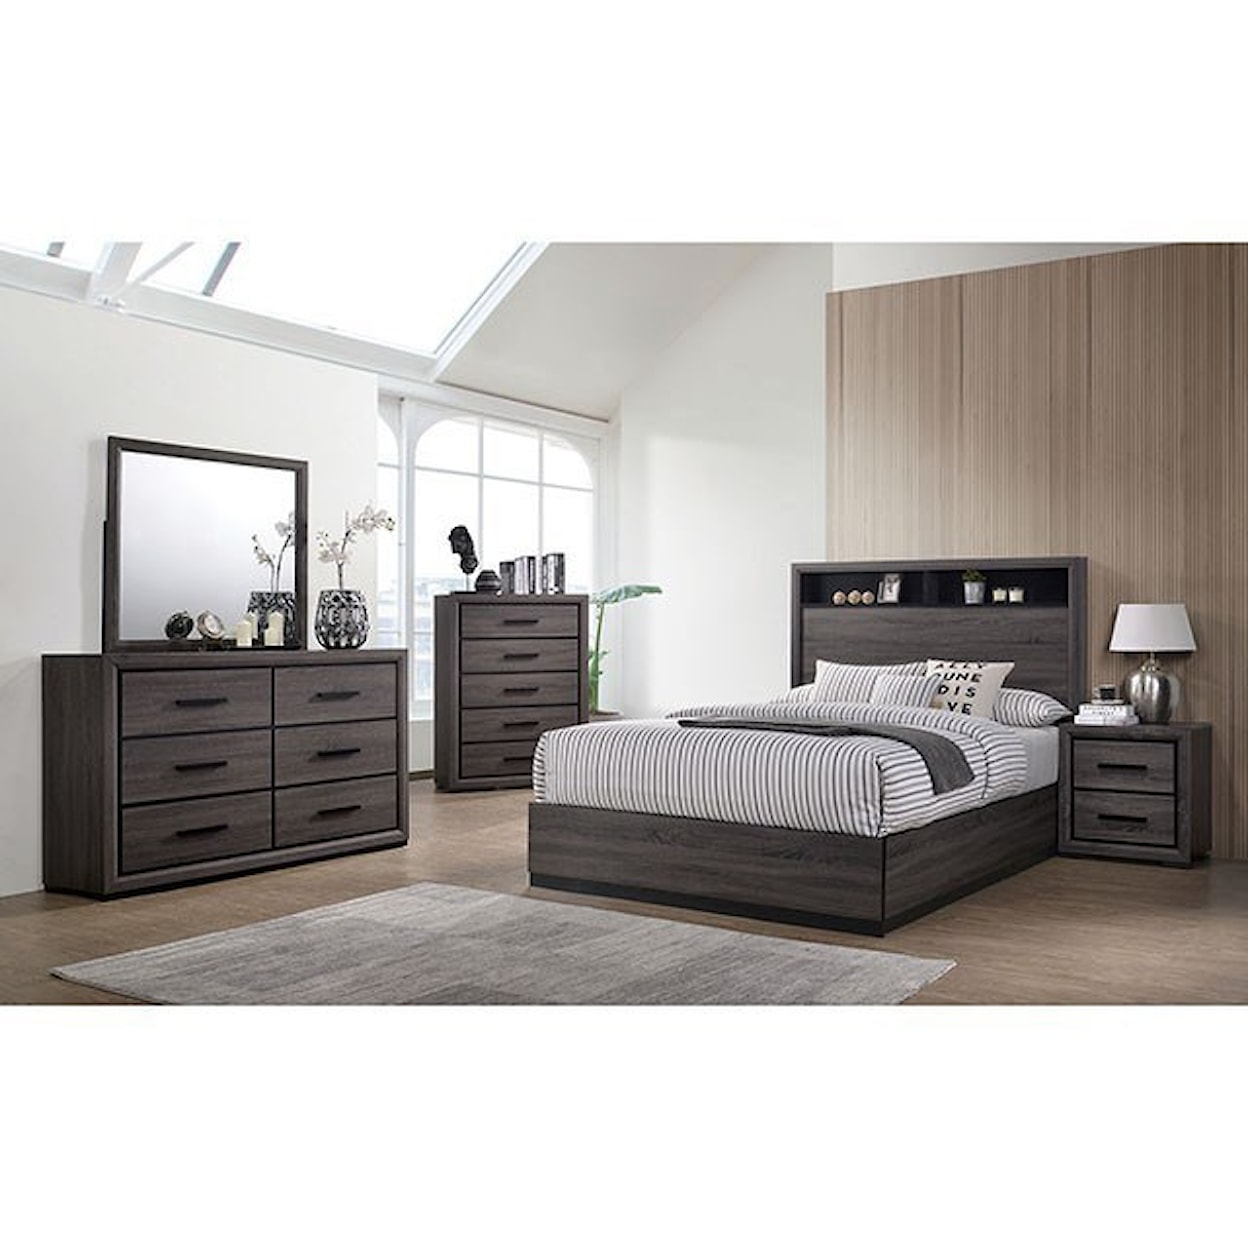 Furniture of America Conwy Queen Bedroom Group